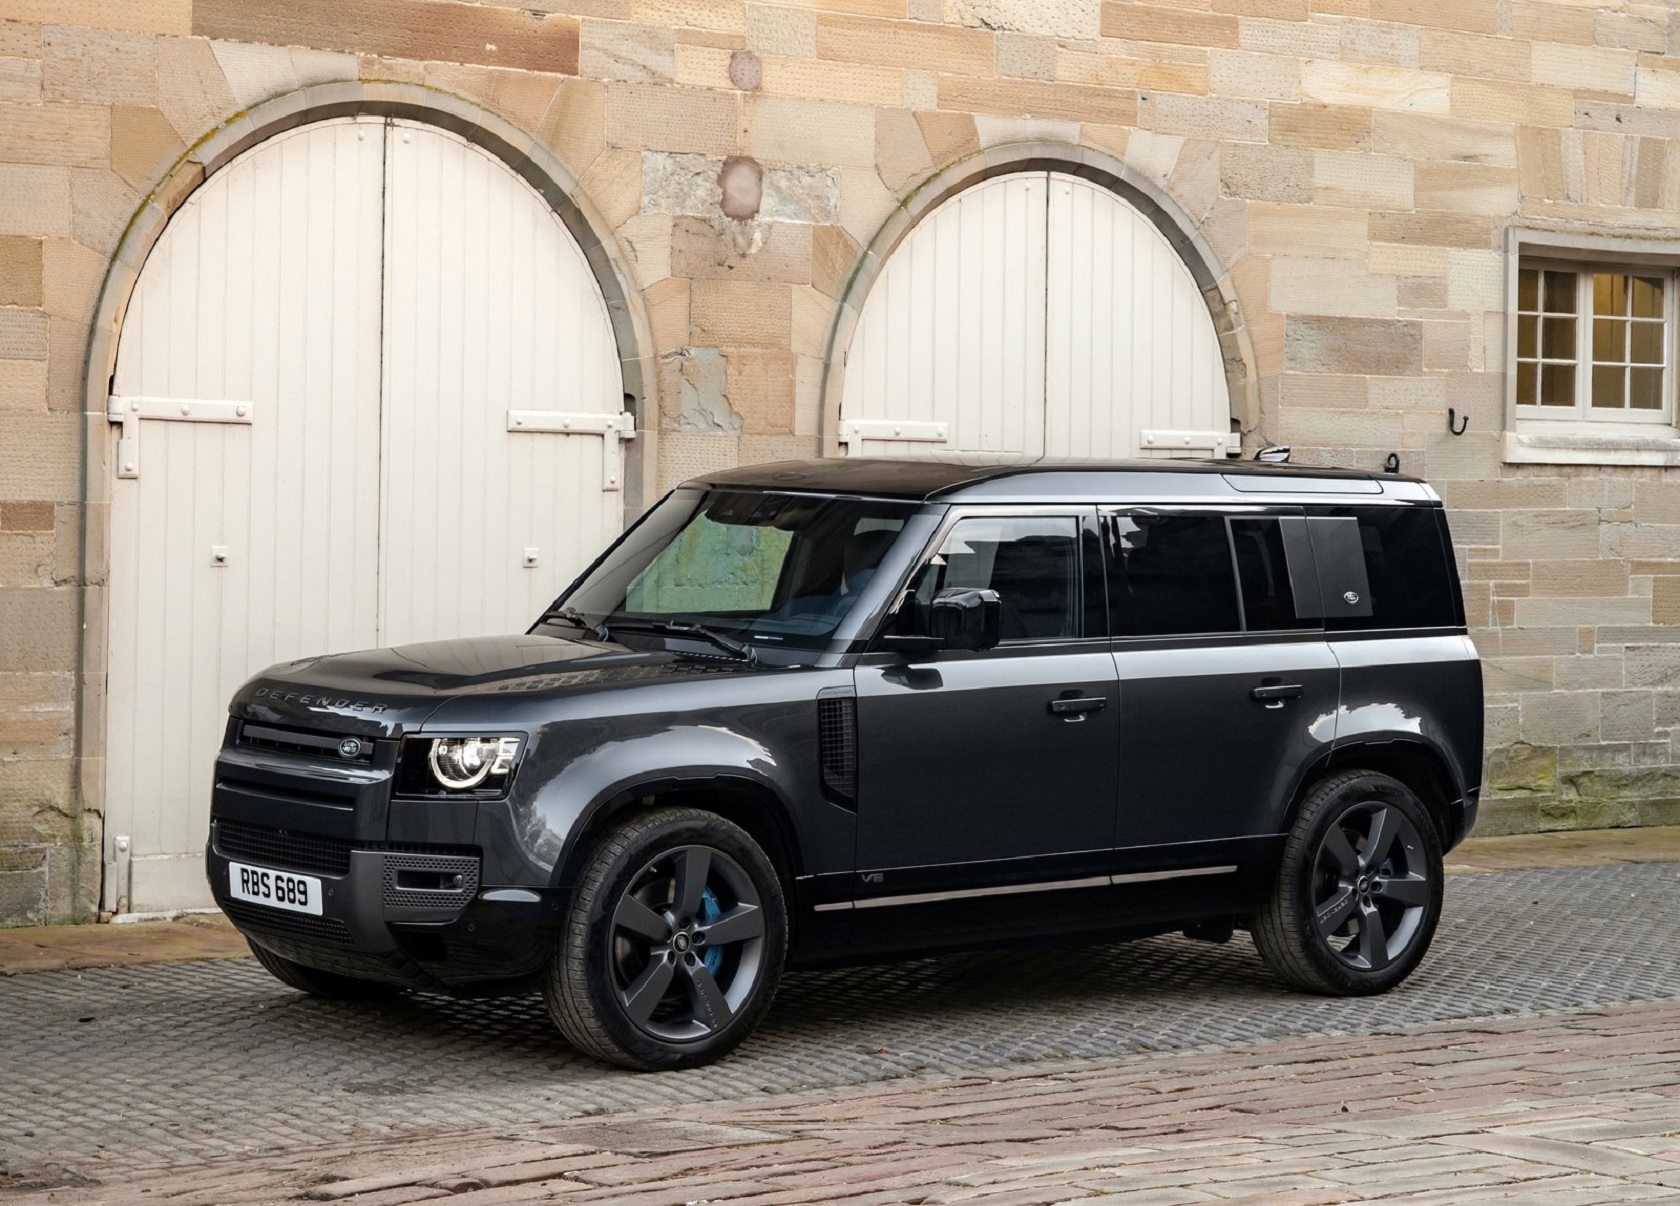 A black 2022 Land Rover Defender V8 parked by a tan stone building